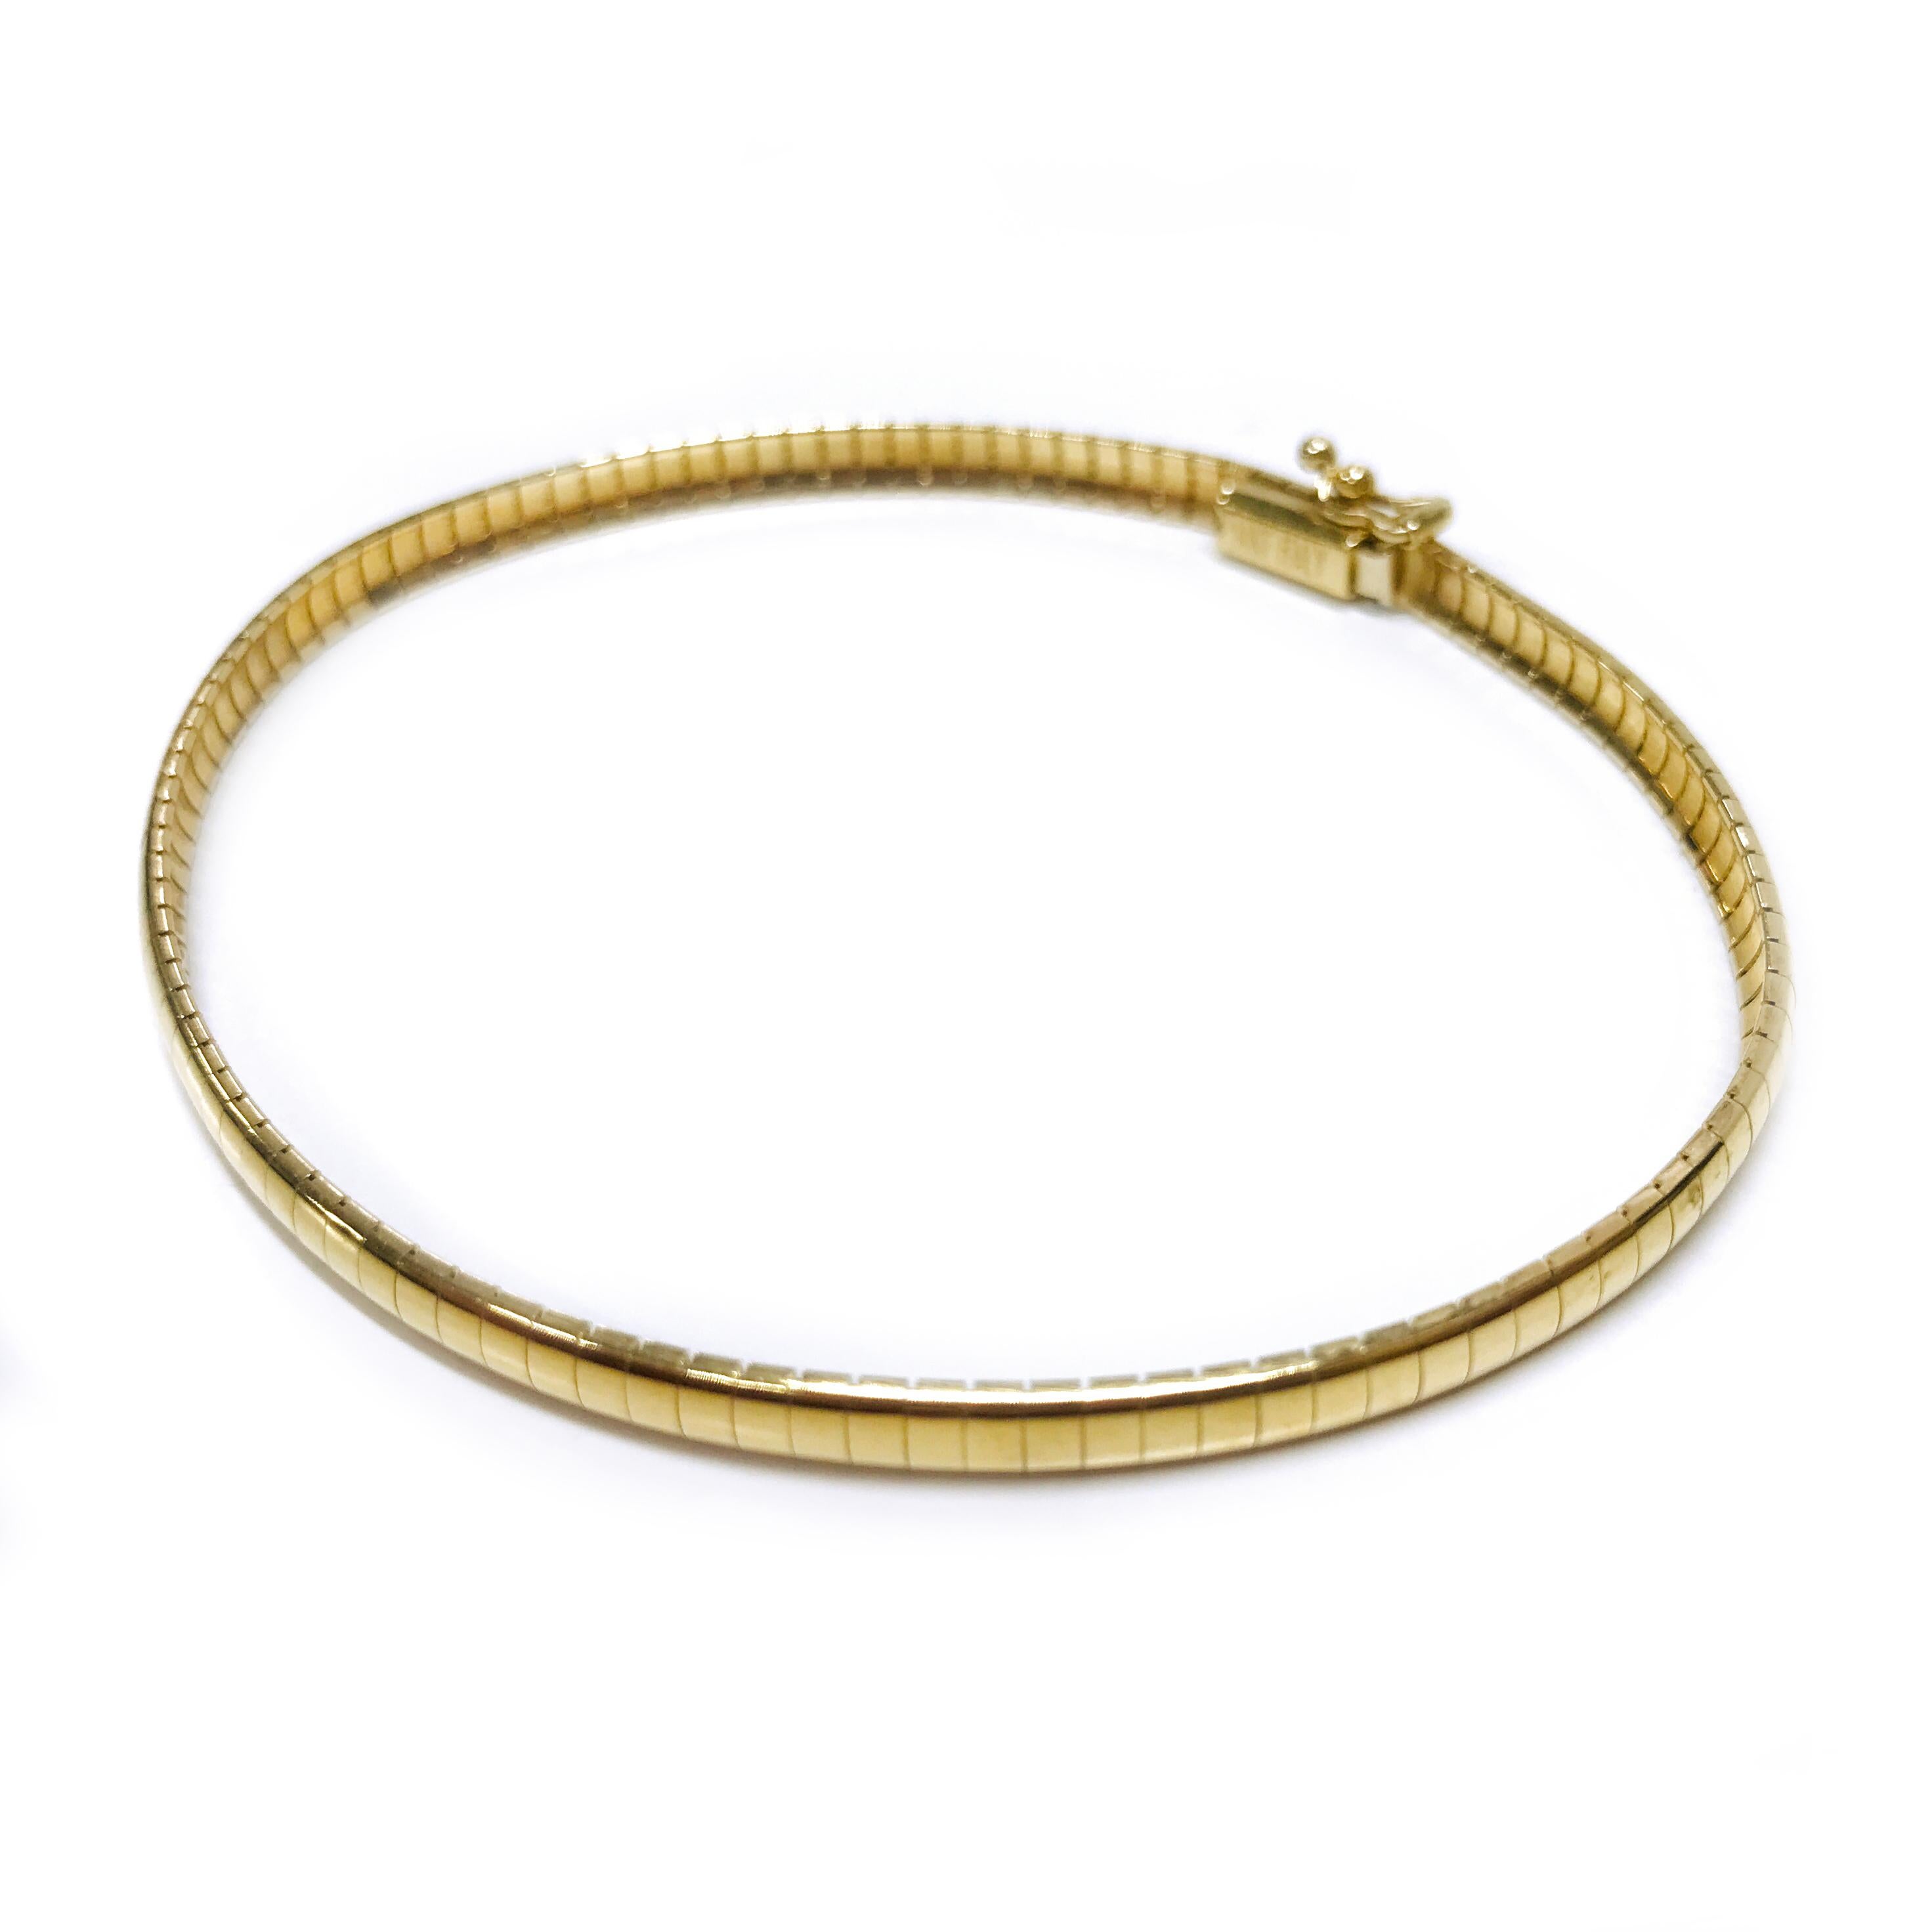 14 Karat Gold Omega Bracelet. The width of the bracelet is 4mm thick. The necklace has a box closure and safety eight. Stamped on the tongue is R and on the box clasp is 14KT ITALY. The total gold weight of the bracelet is 8.8 grams and the bracelet